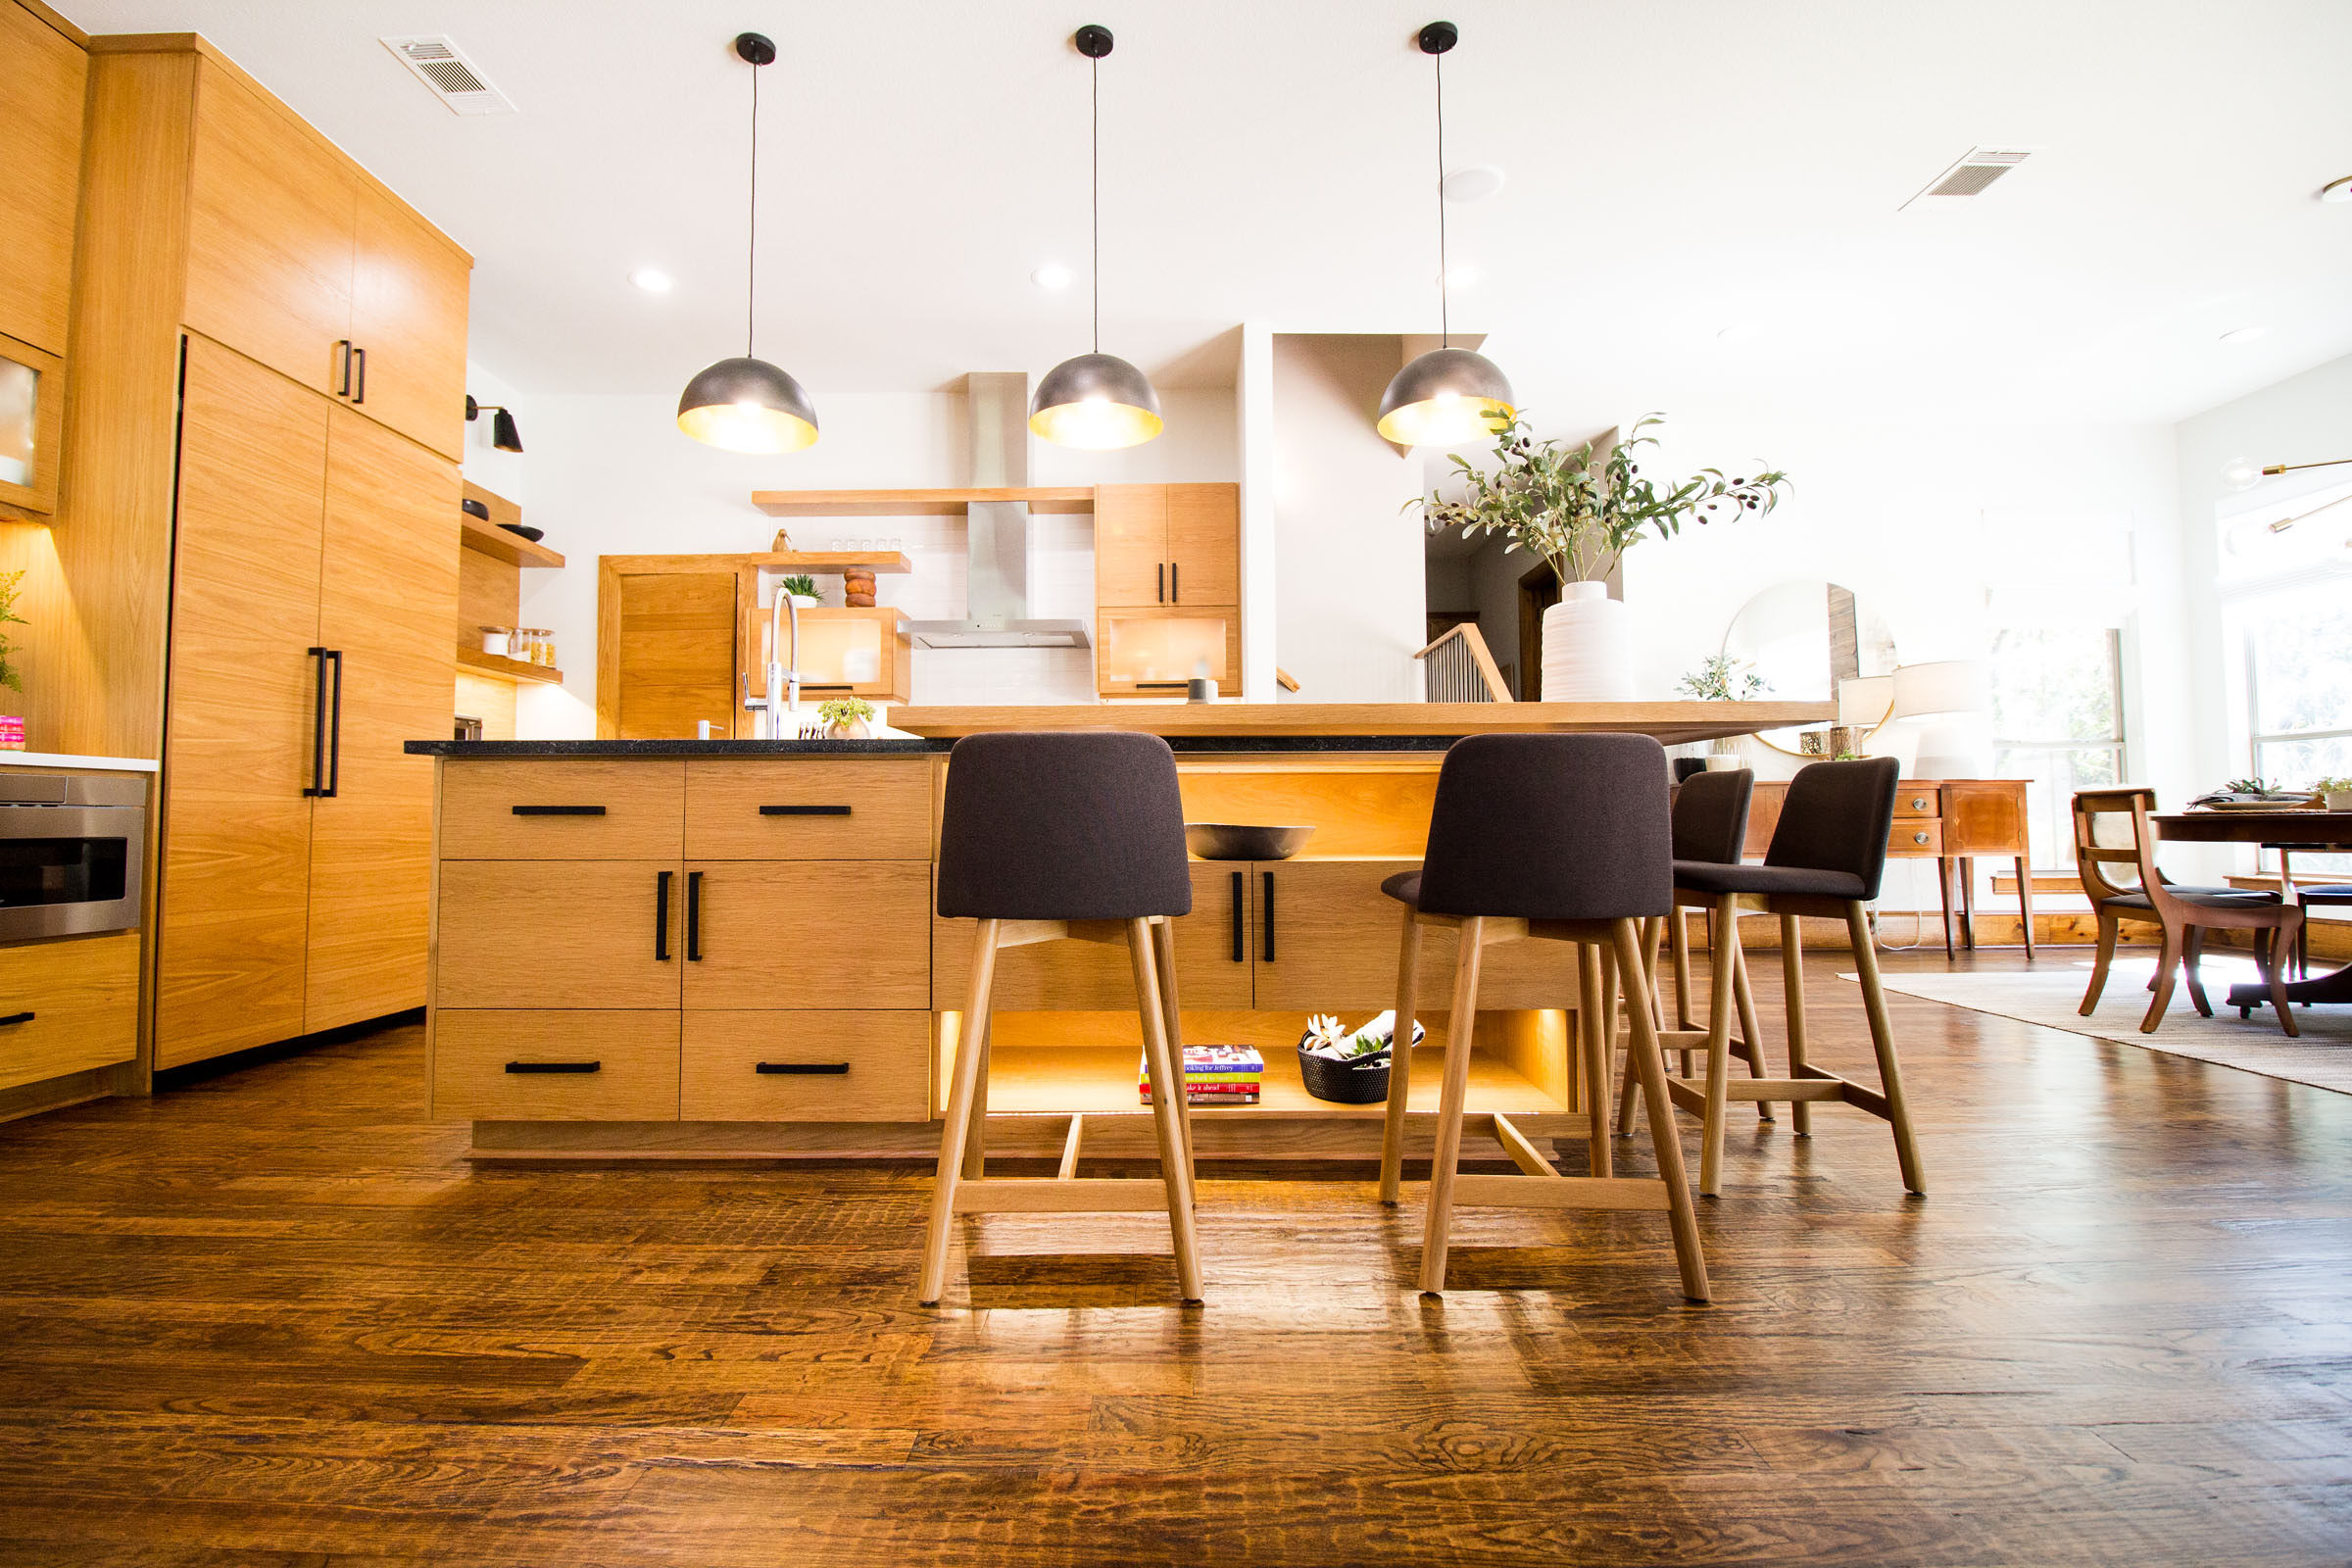 Just the right angle to see the hidden storage areas of this beautiful kitchen island.